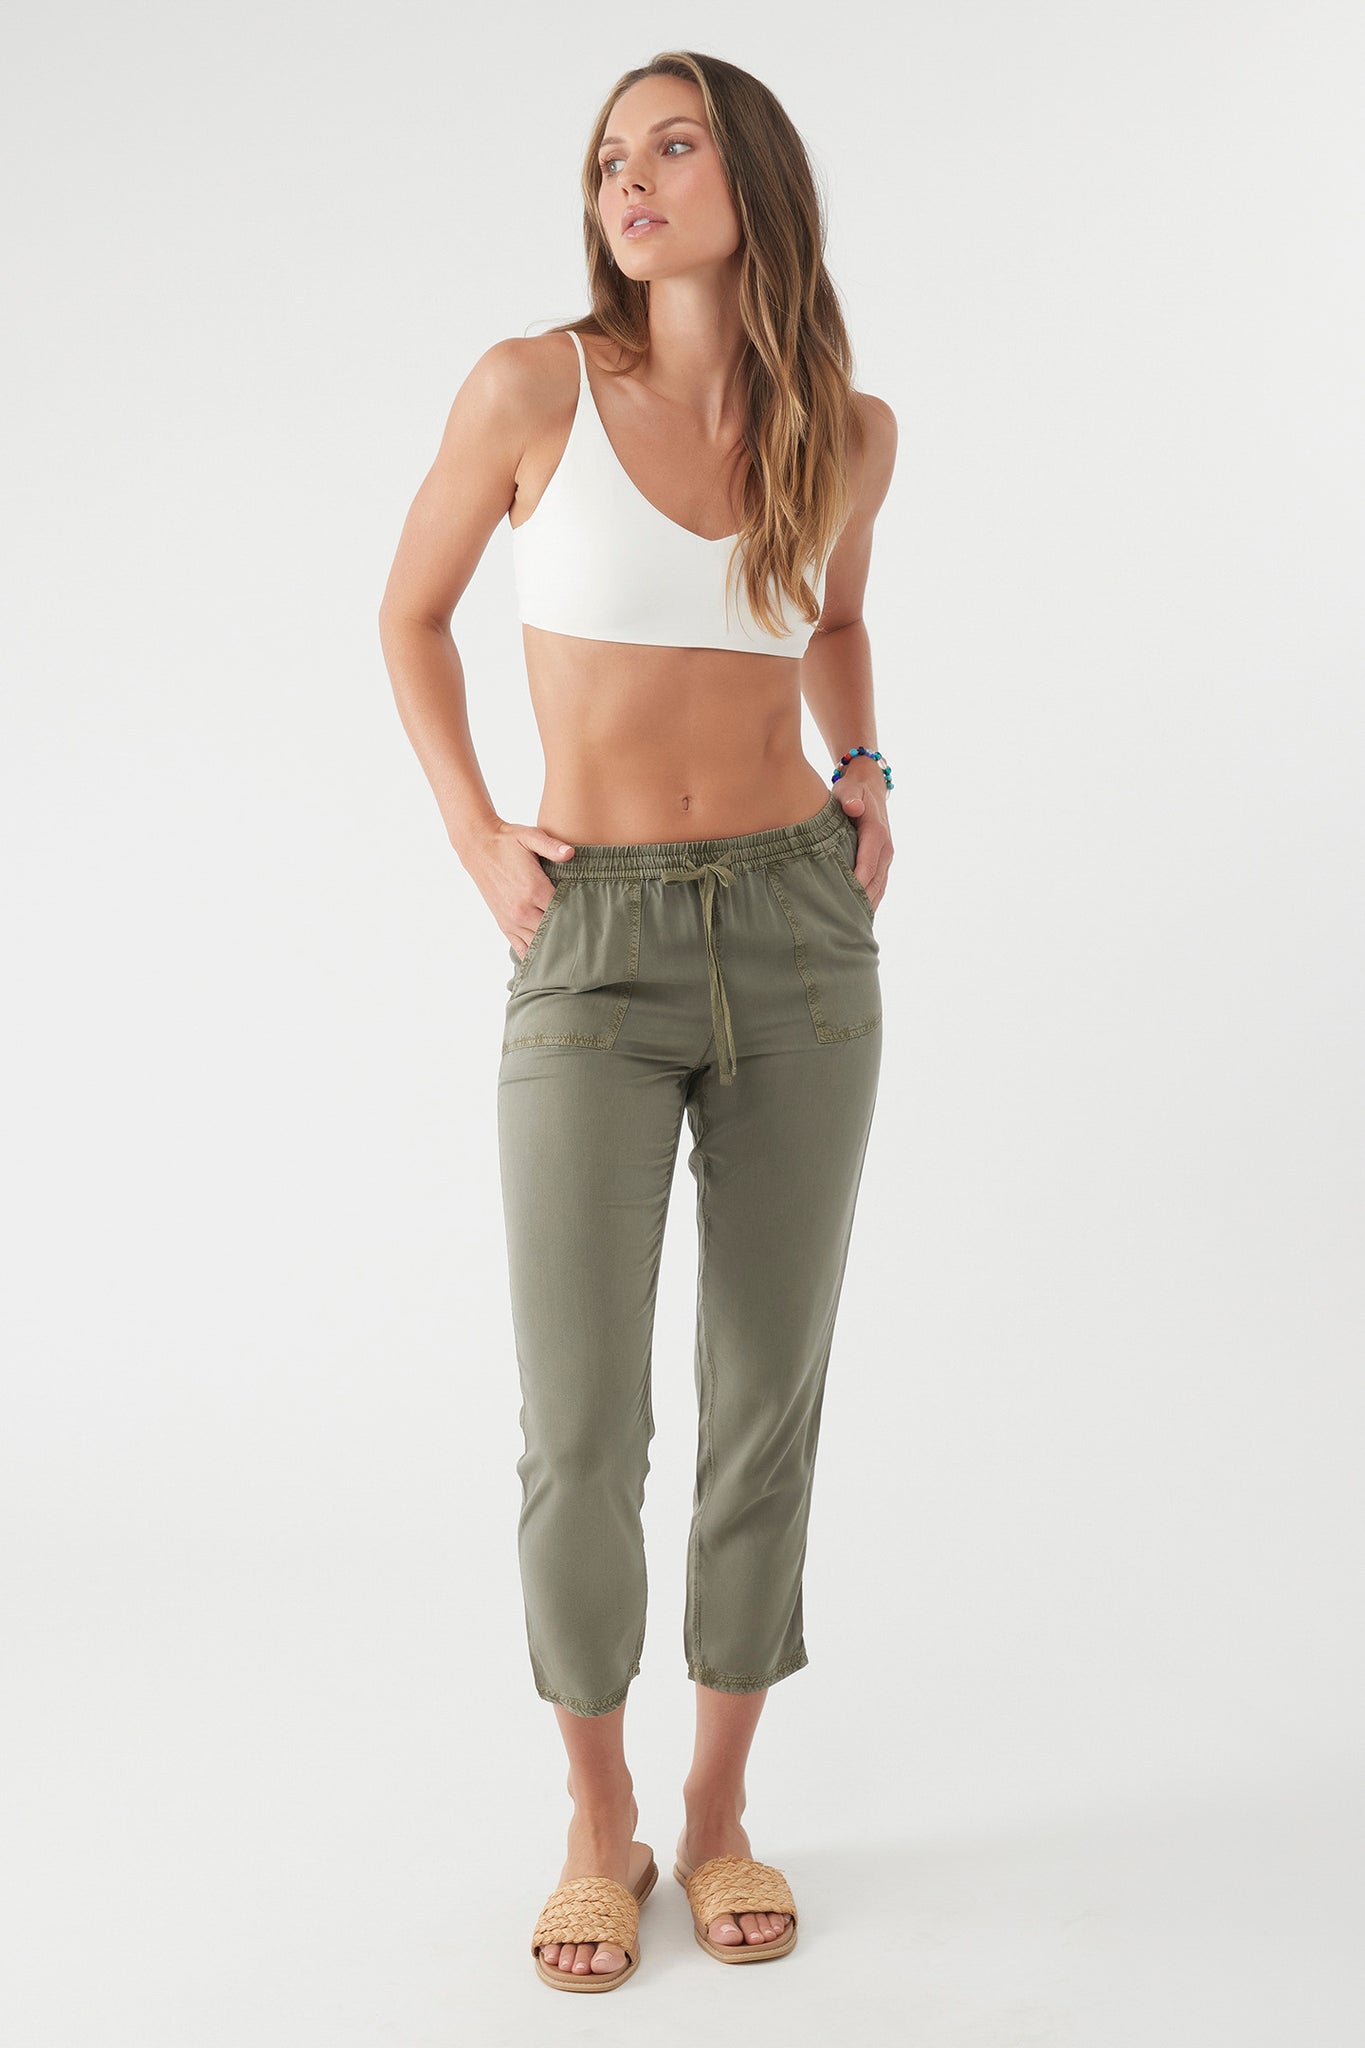 O'neill Star Insulated Pants Women's- Army Green